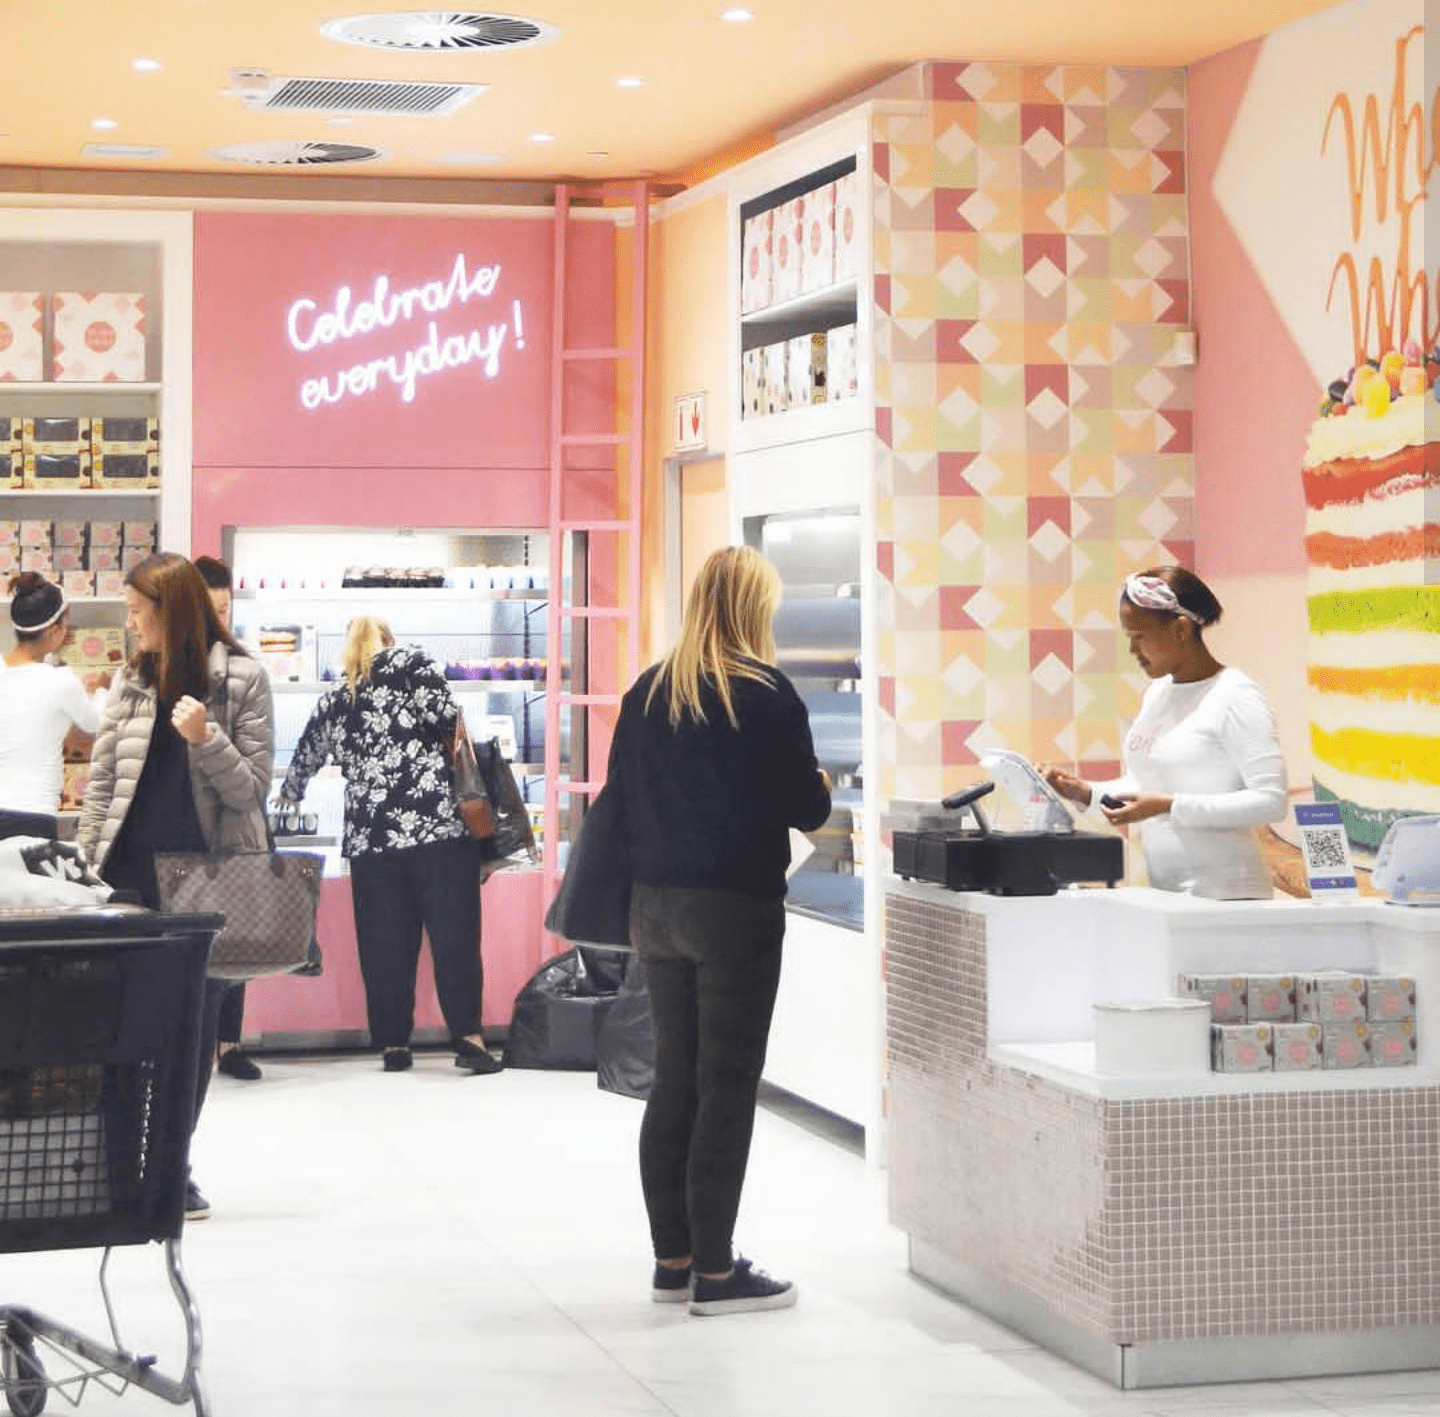 The Velvet Cake Co. shop at Canal Walk